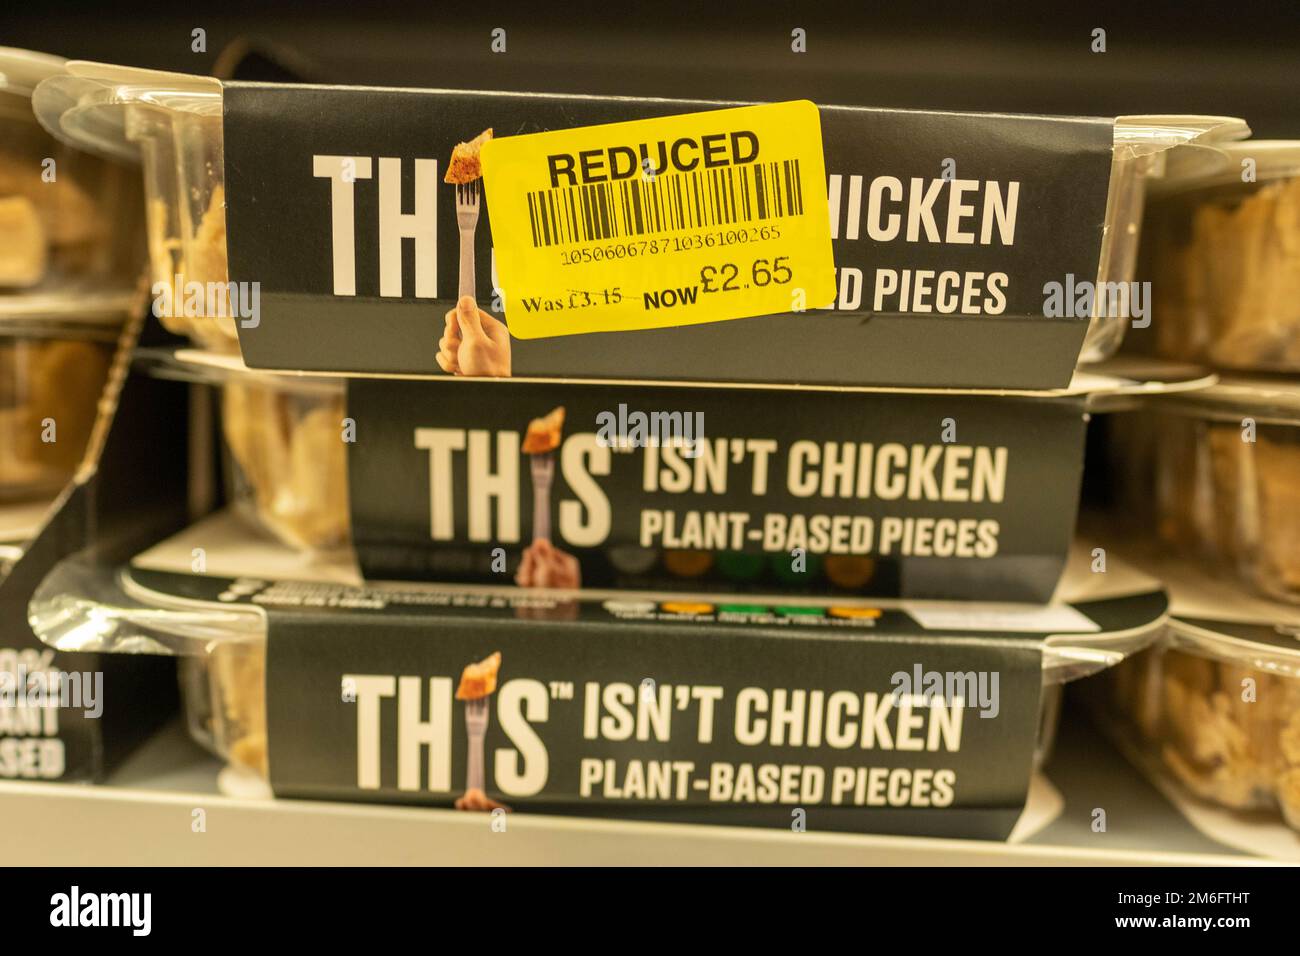 Surrey UK- December 2022: Reduced unsold meat free products on supermarket shelf Stock Photo